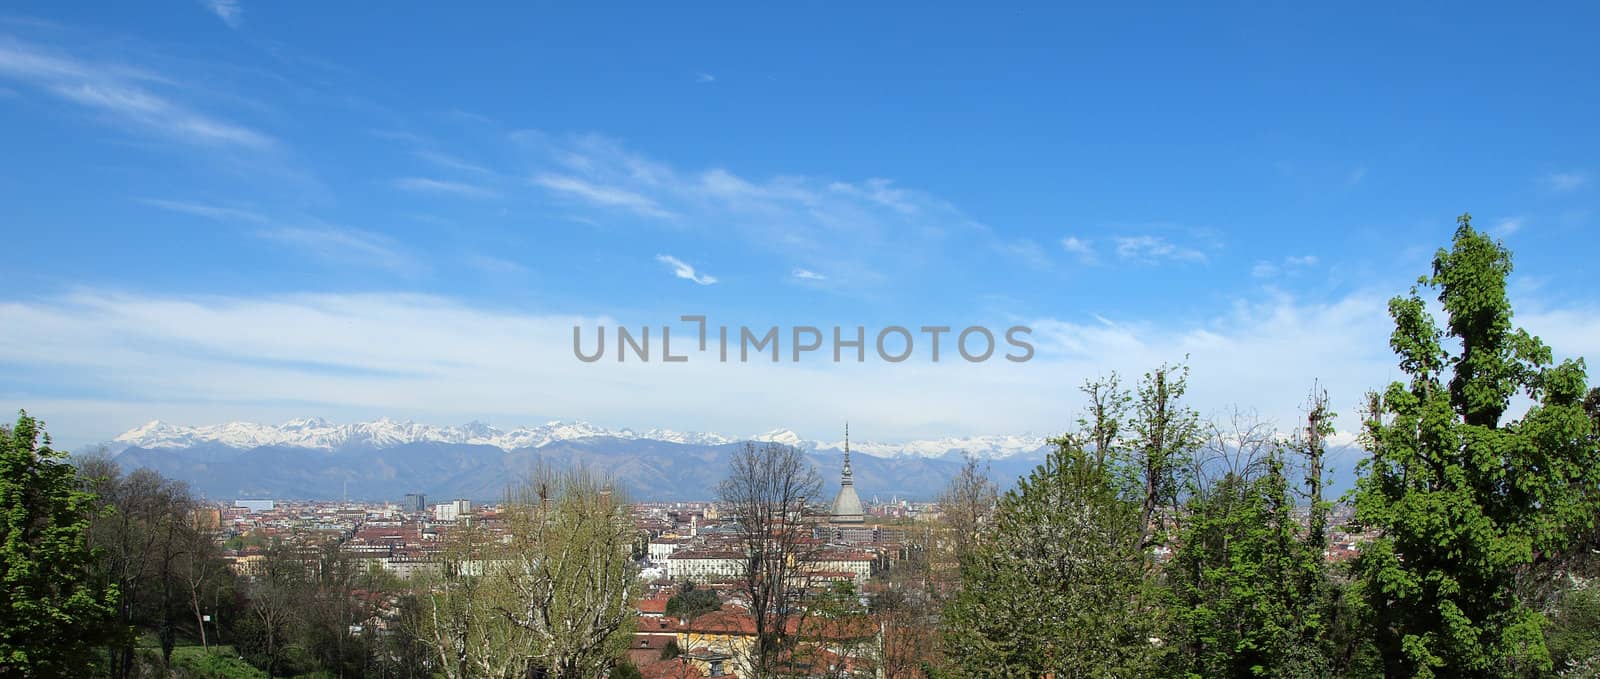 City of Turin (Torino) skyline panorama seen from the hill